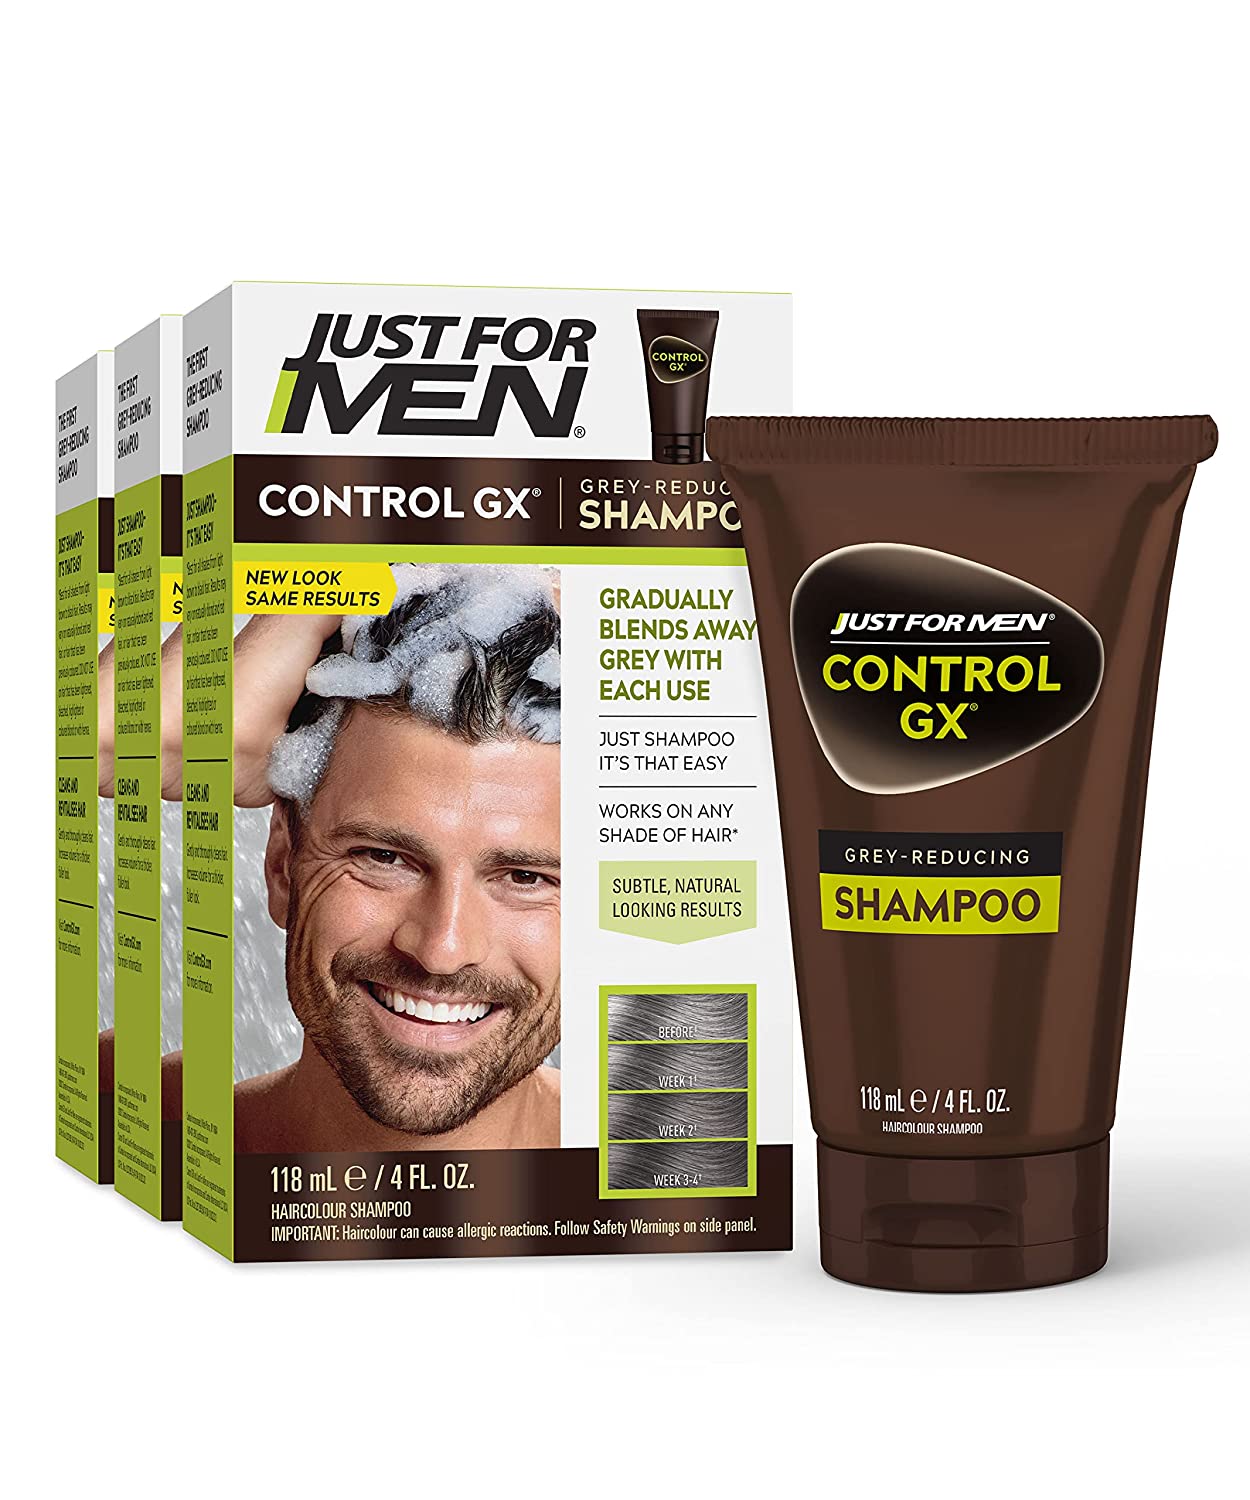 Just For Men Control GX Grey Reducing Shampoo, Gradual Hair Color for Stronger and Healthier Hair, 4 Fl Oz - Pack of 3